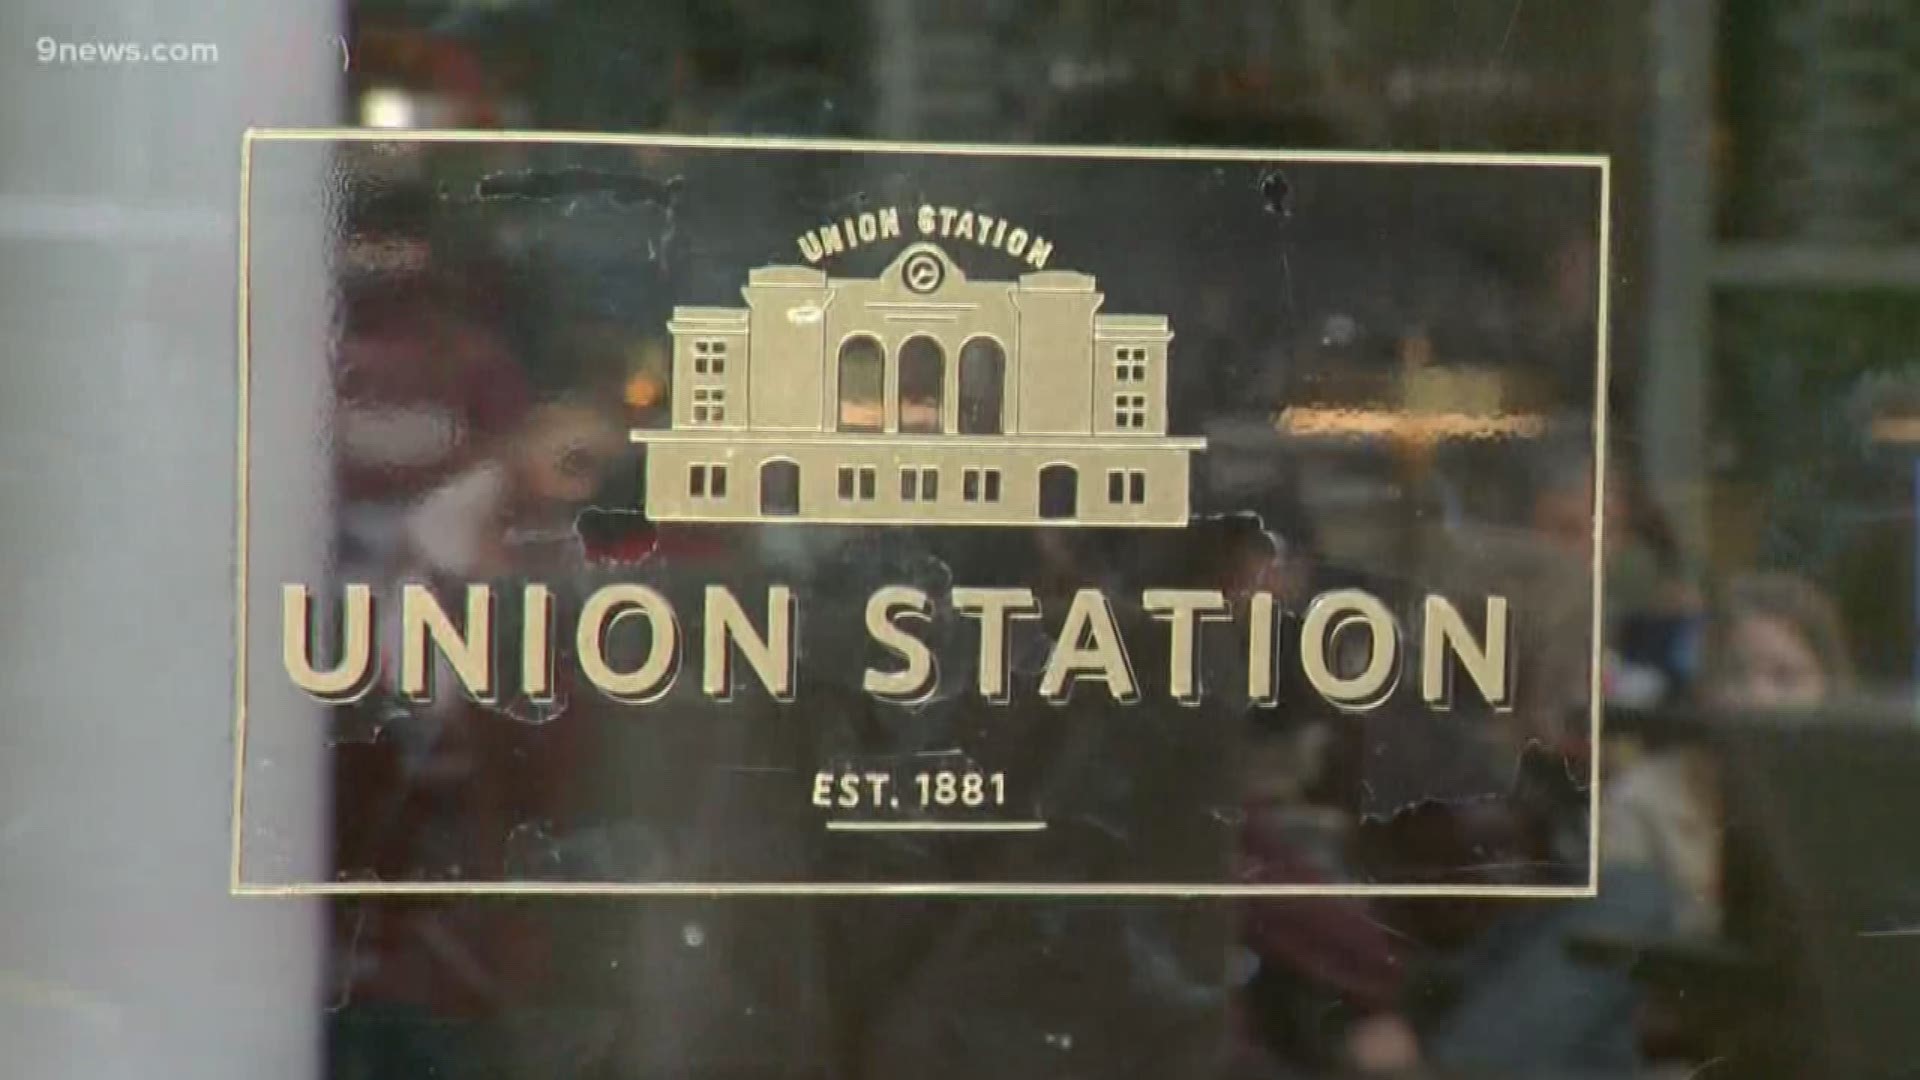 Denver's Union station may be publicly owned, but it's privately leased and managed.